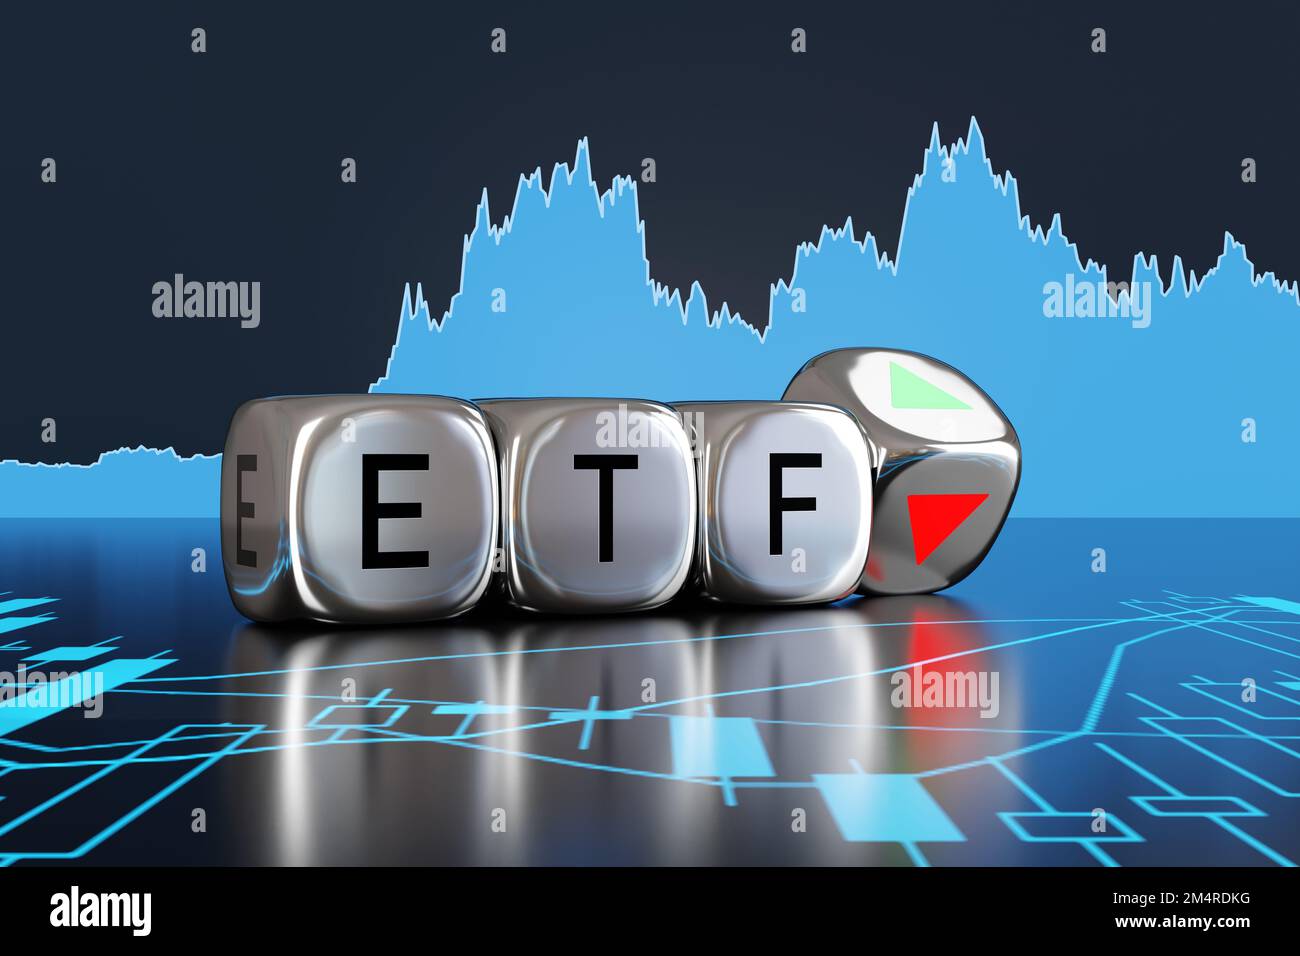 Silver metallic dice showing the alphabets ETF and an up and down arrow on backgrounds of stock charts. Investment of exchange-traded funds Stock Photo